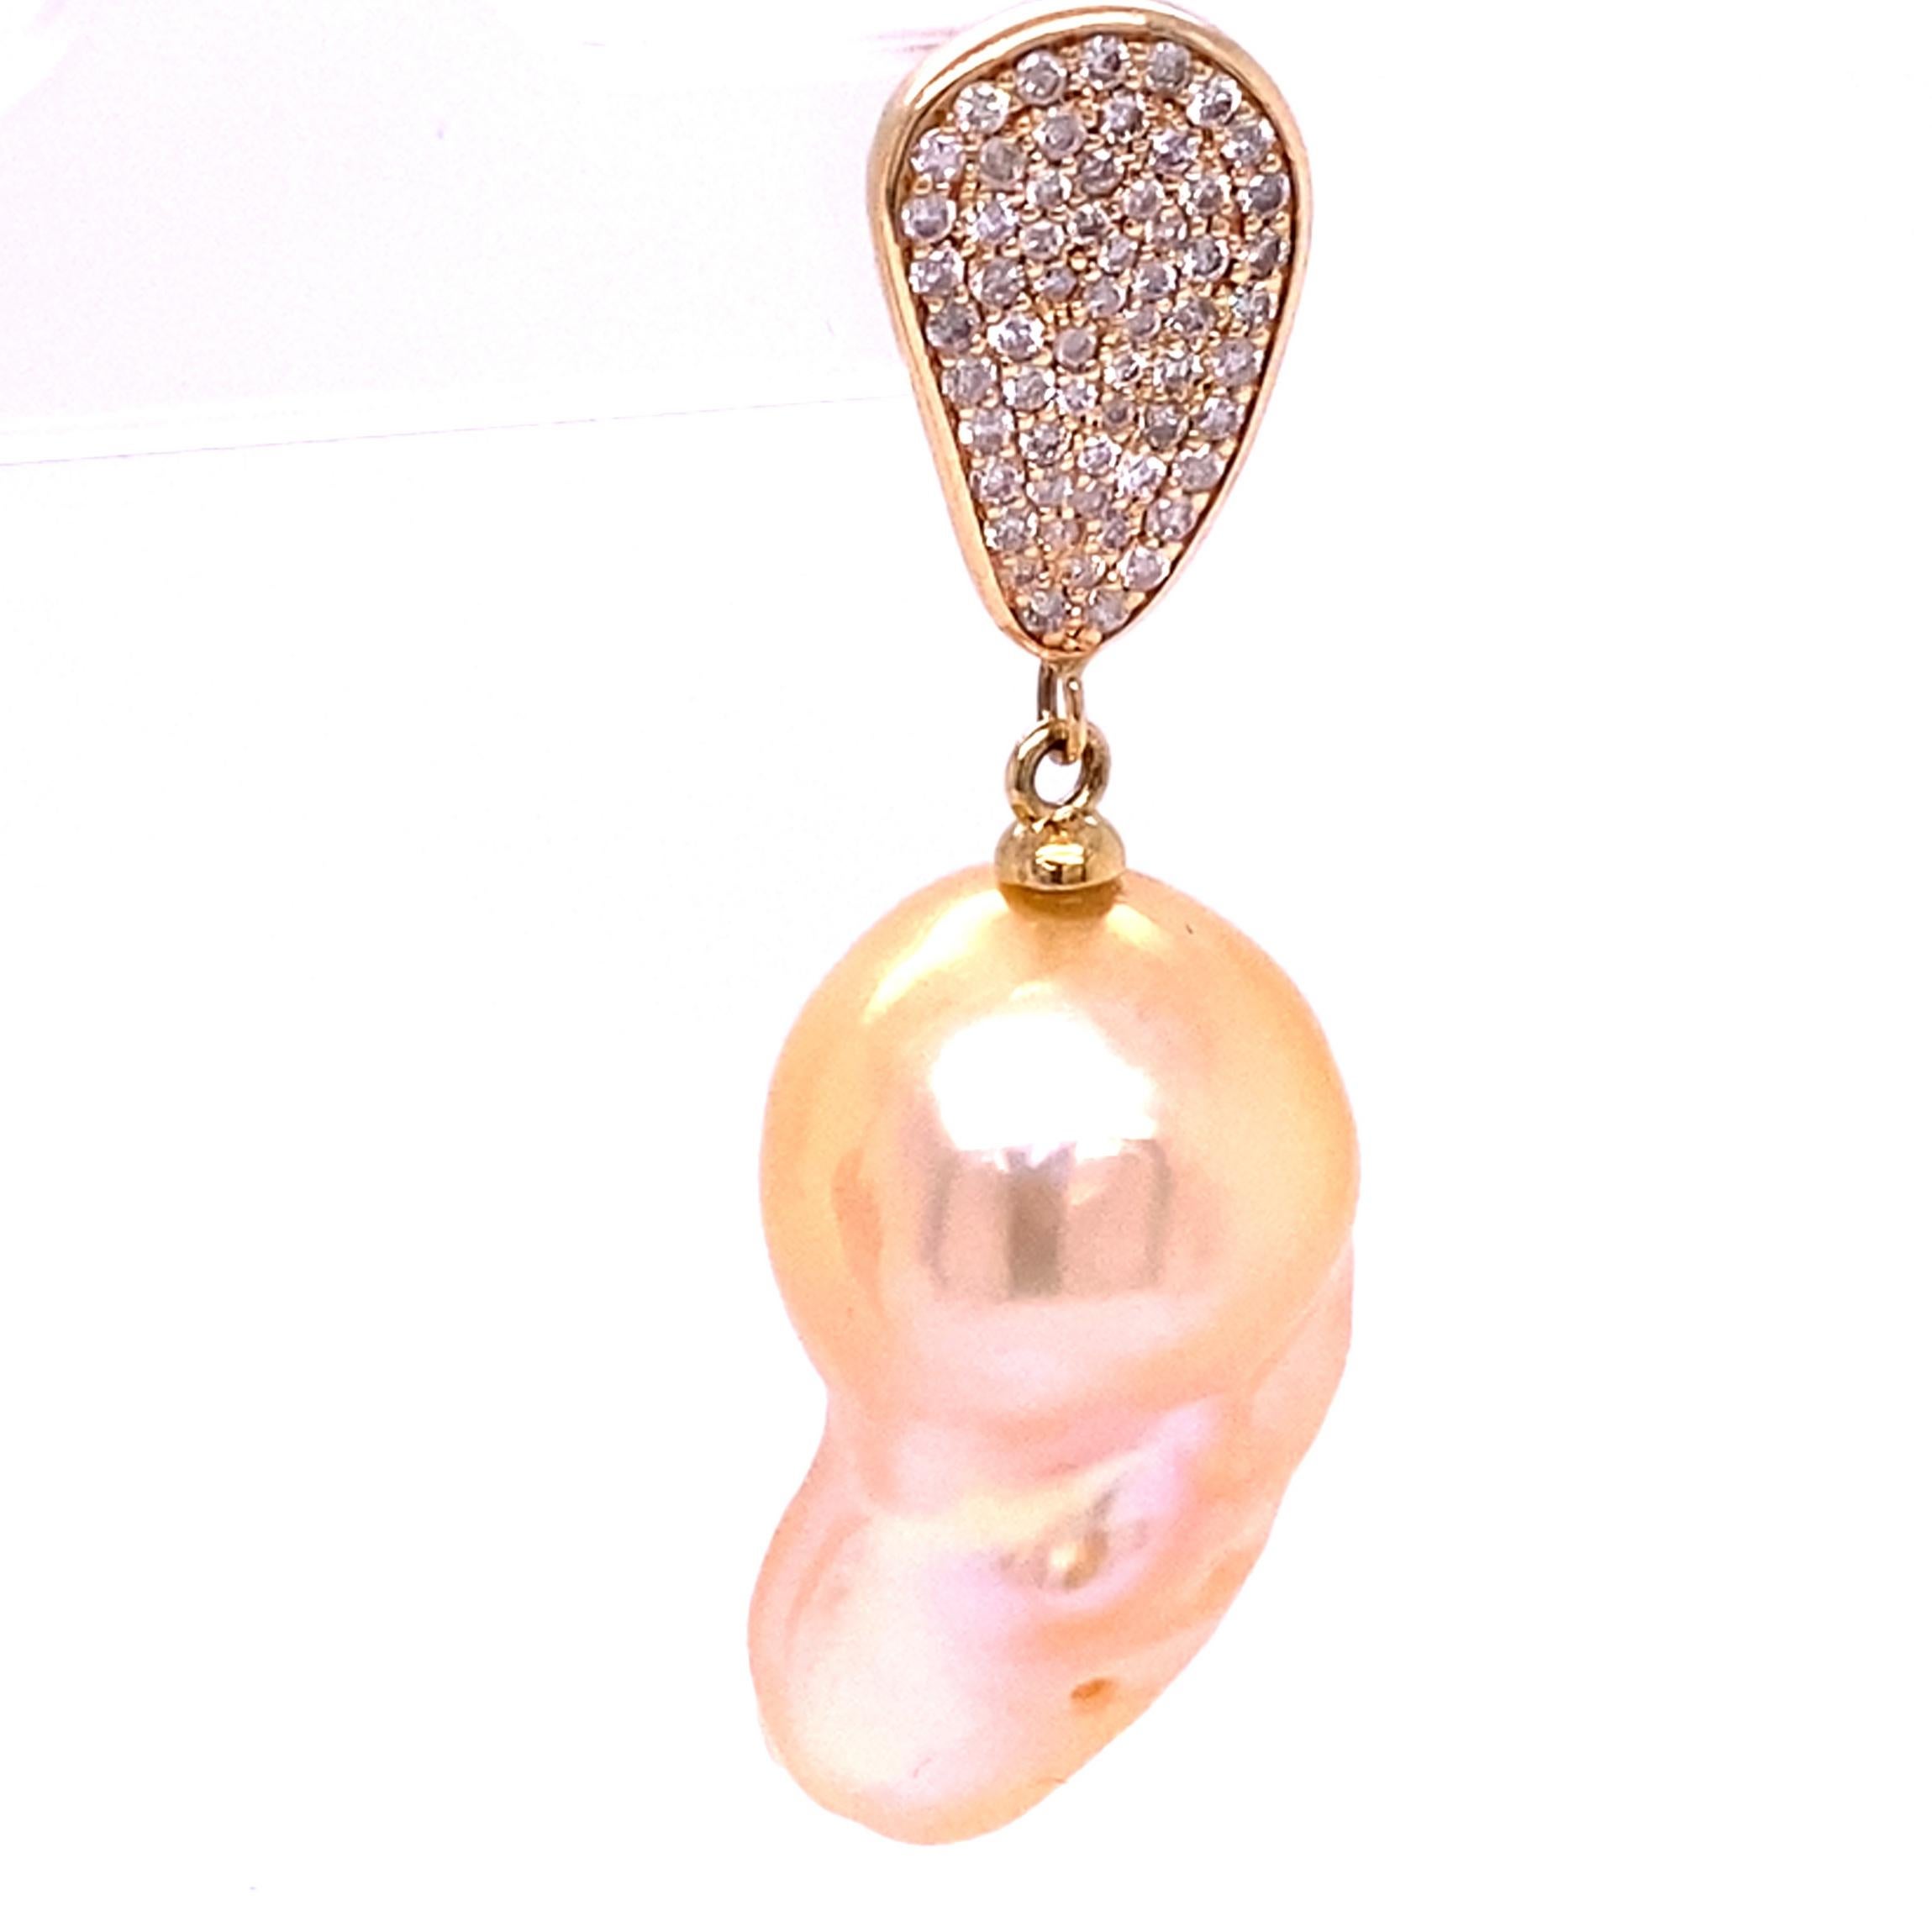 Amp up the glamour with these stunning Diamond Teardrop Natural Baroque Pearl Drop Earrings.

Featuring  hand selected  golden hued natural baroque earrings dangling from a highly polished  yellow gold Teardrop with 1.30ct of sparkling diamonds,